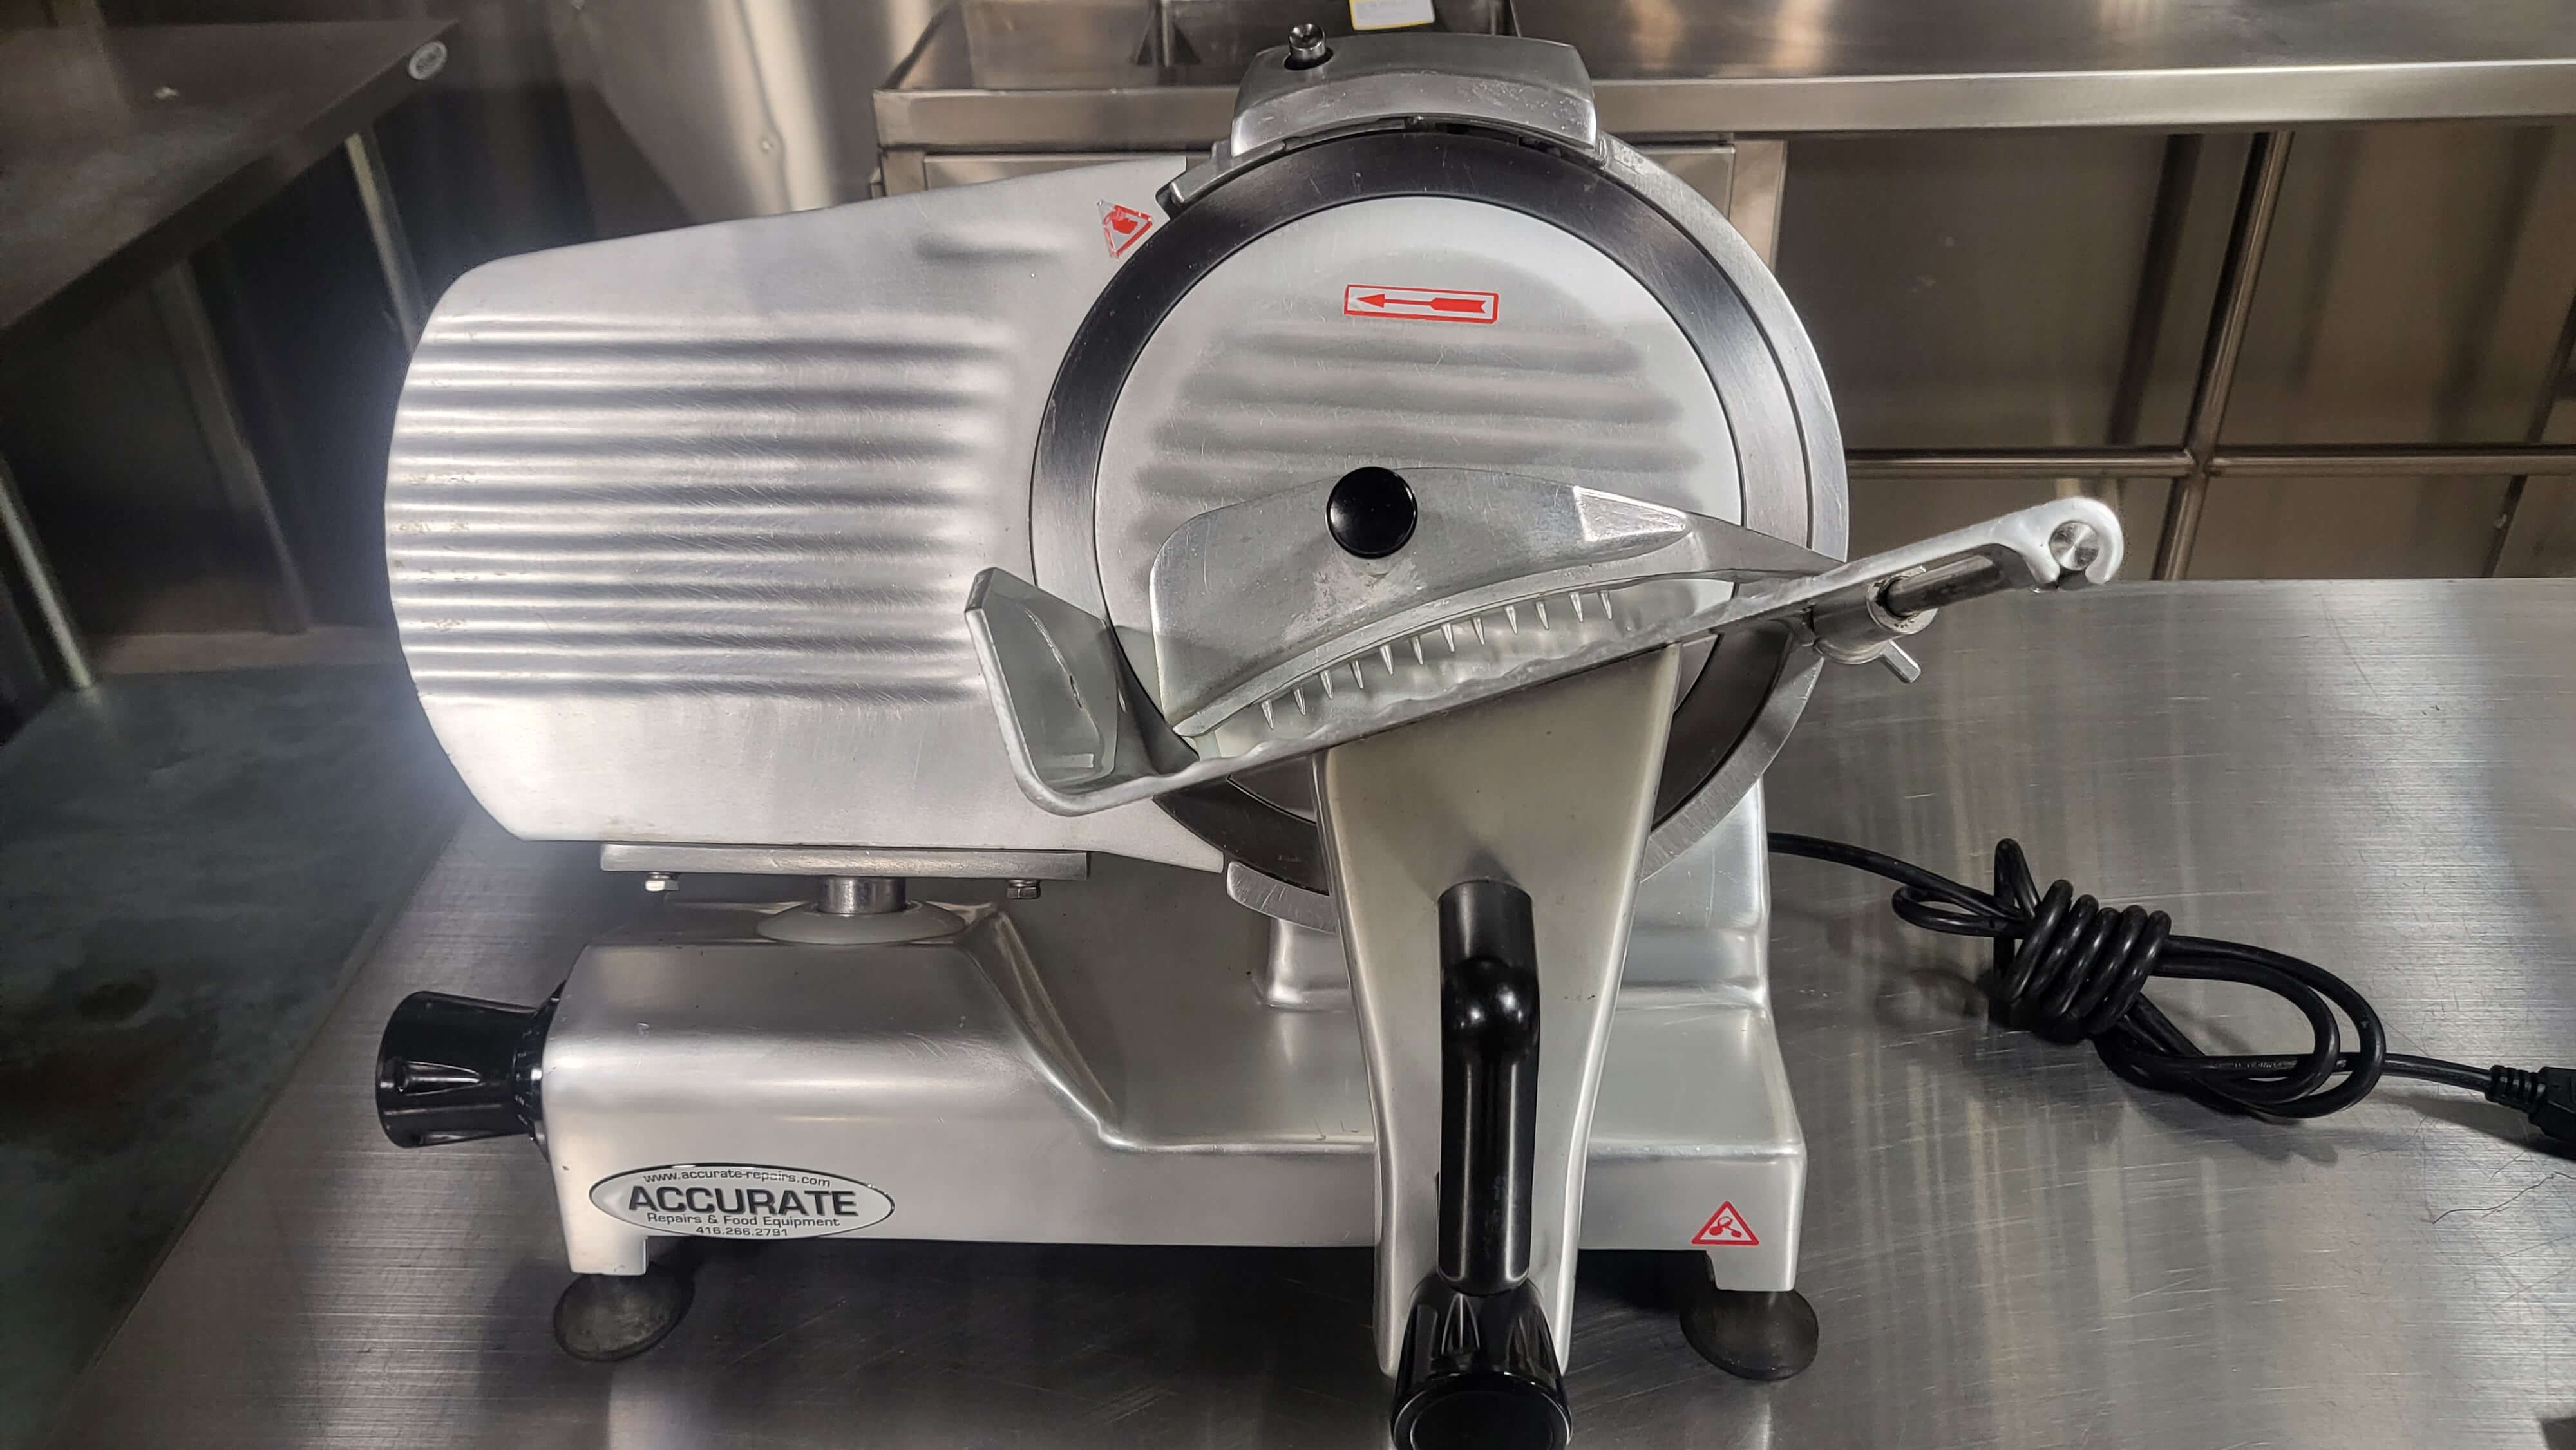 Thumbnail - Omcan HBS-250 Meat Slicer